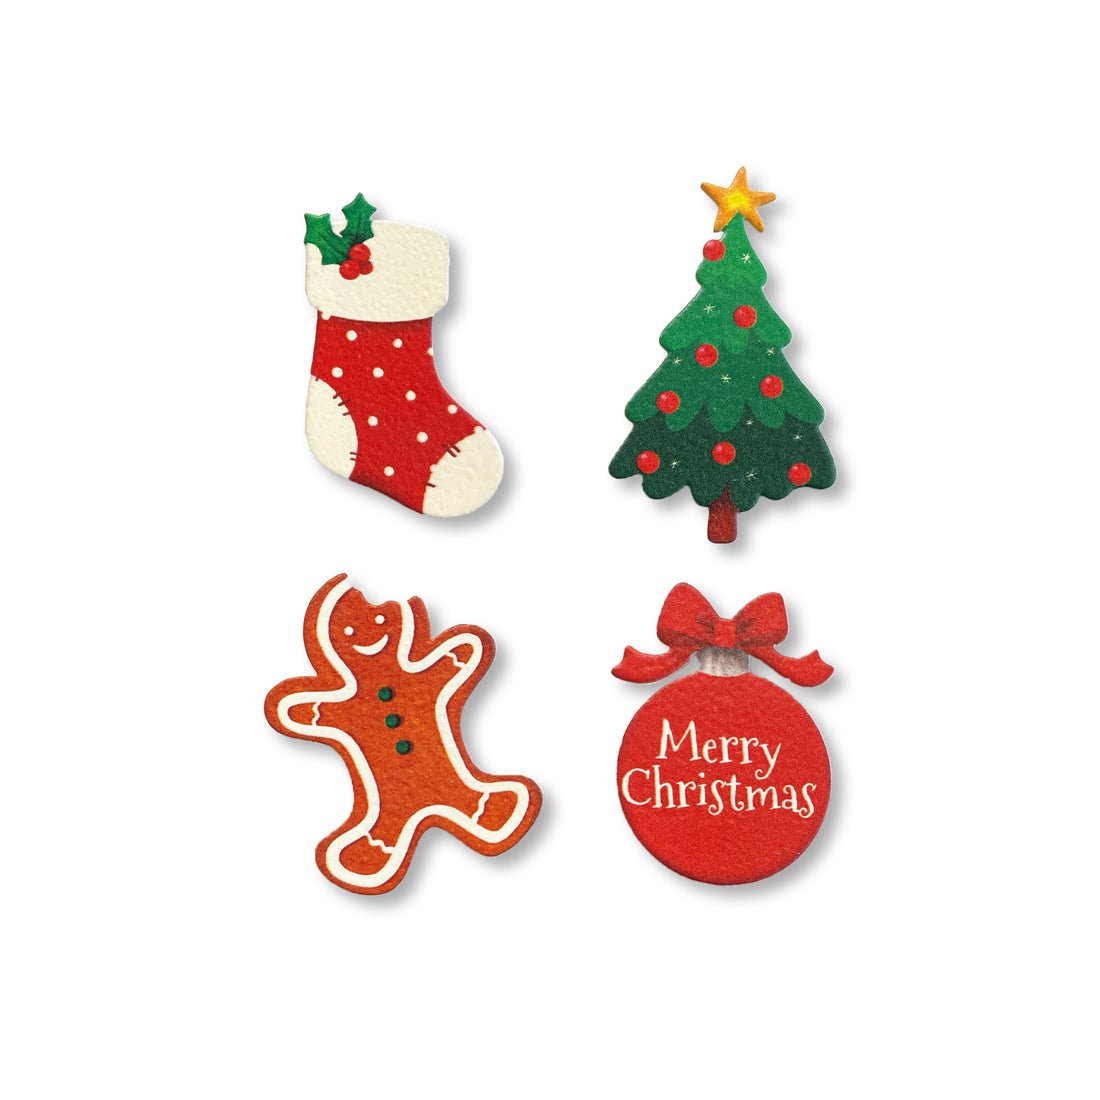 Merry Christmas Magnets S/4